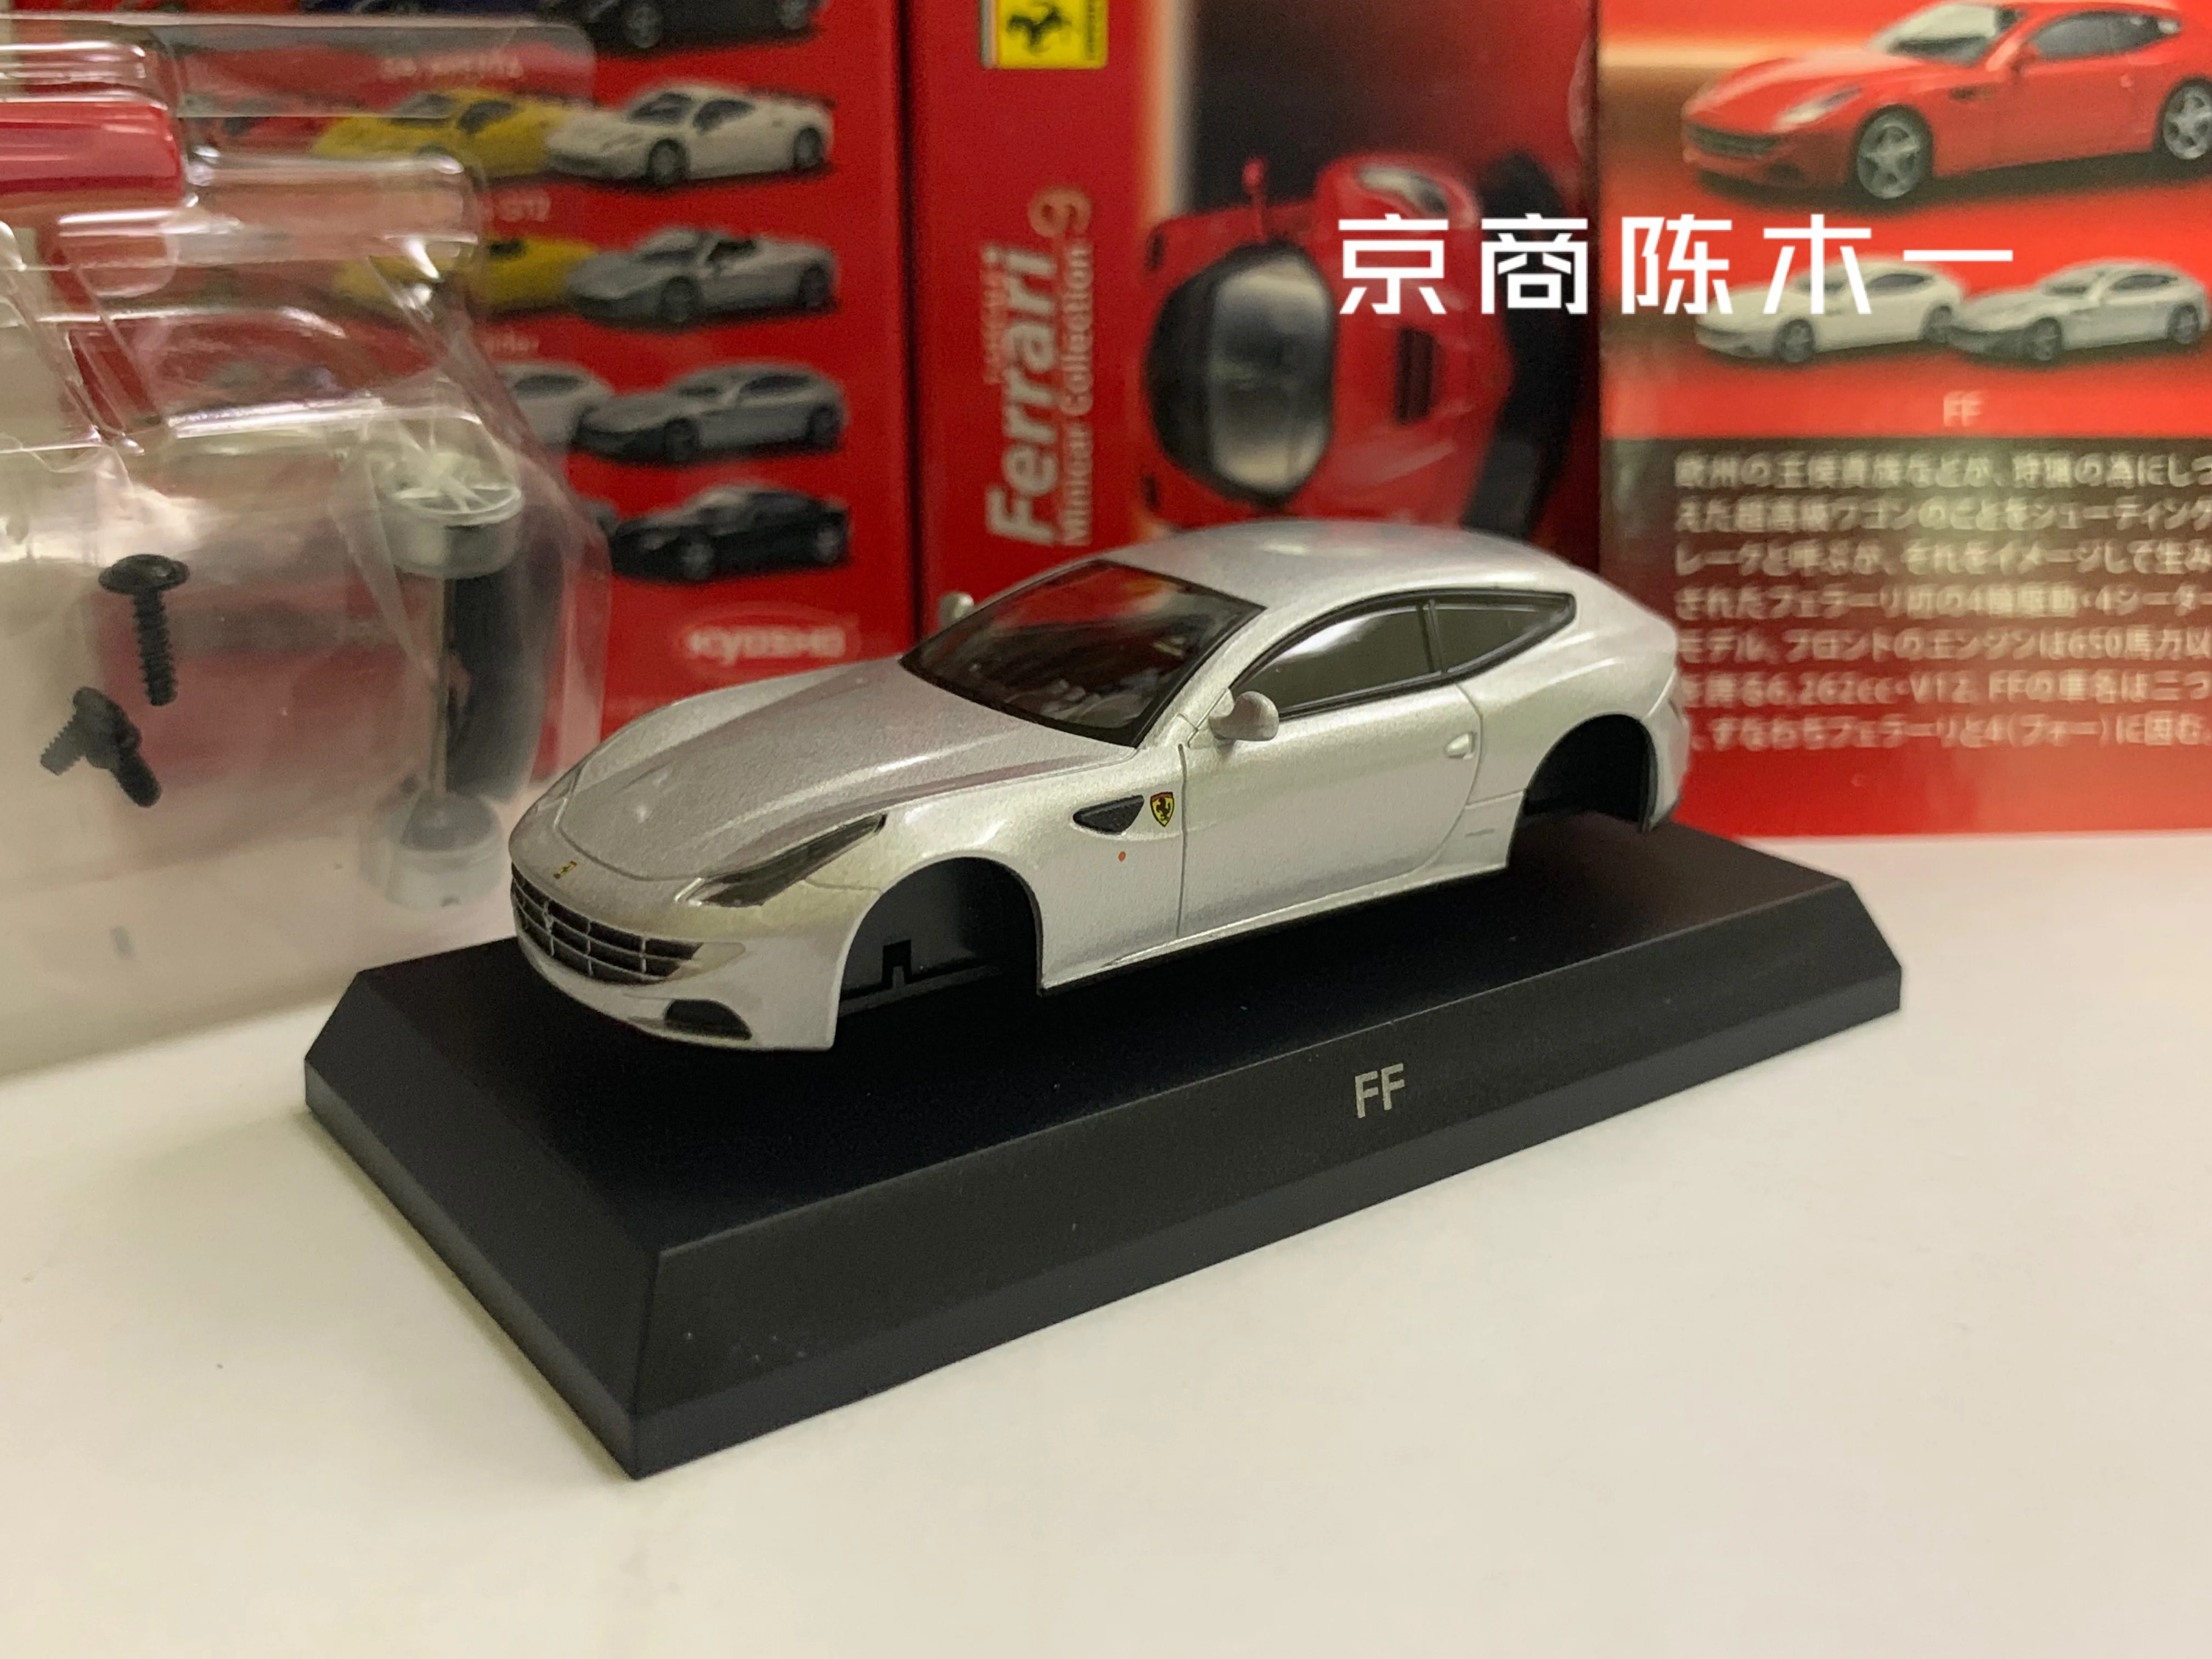 

1/64 KYOSHO Ferrari FF LM F1 RACING Collection of die-cast alloy assembled car decoration model toys